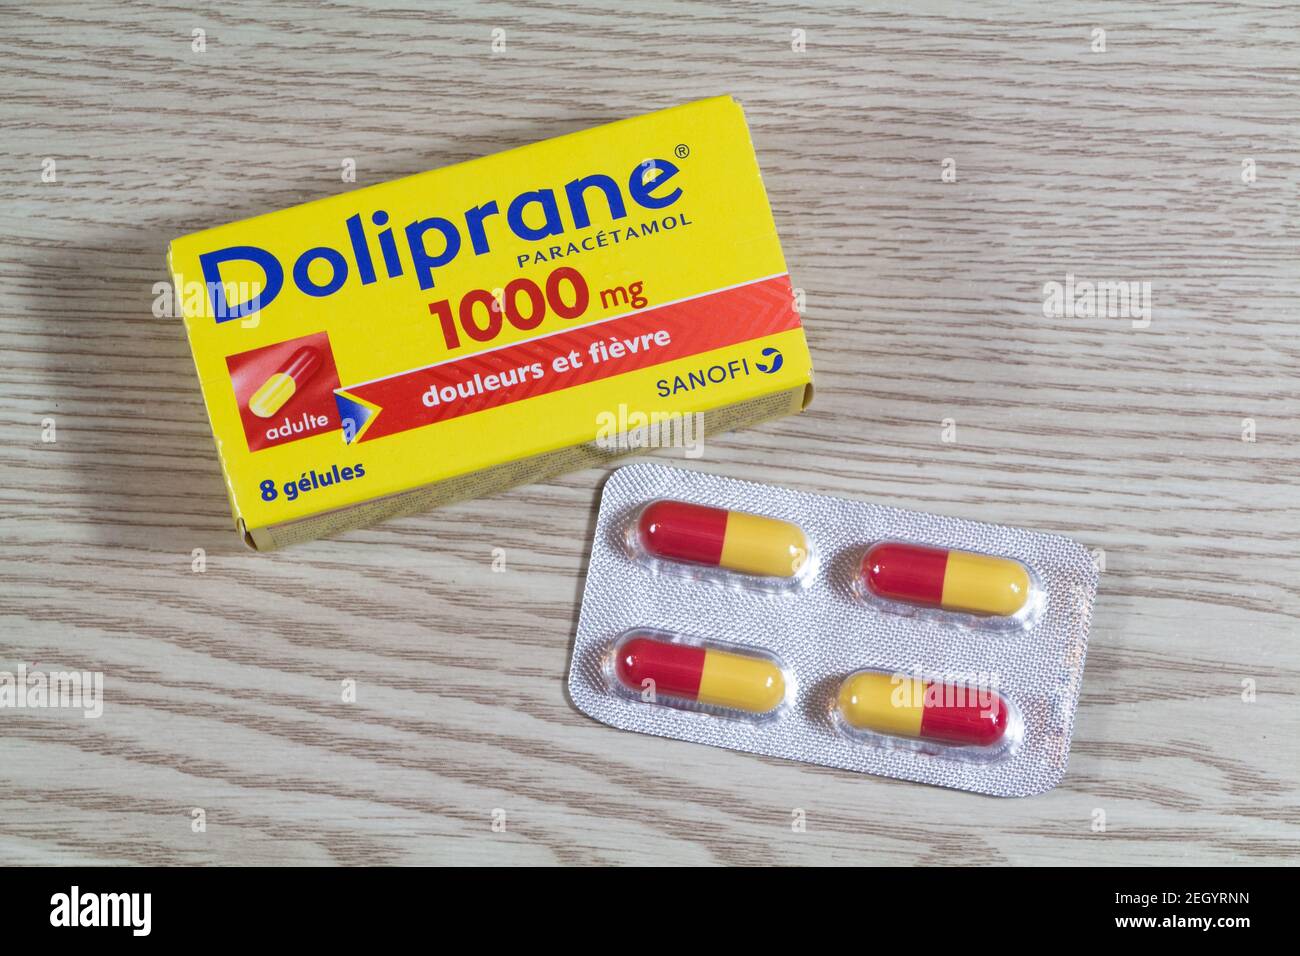 Doliprane 1000mg adult box of 8cps